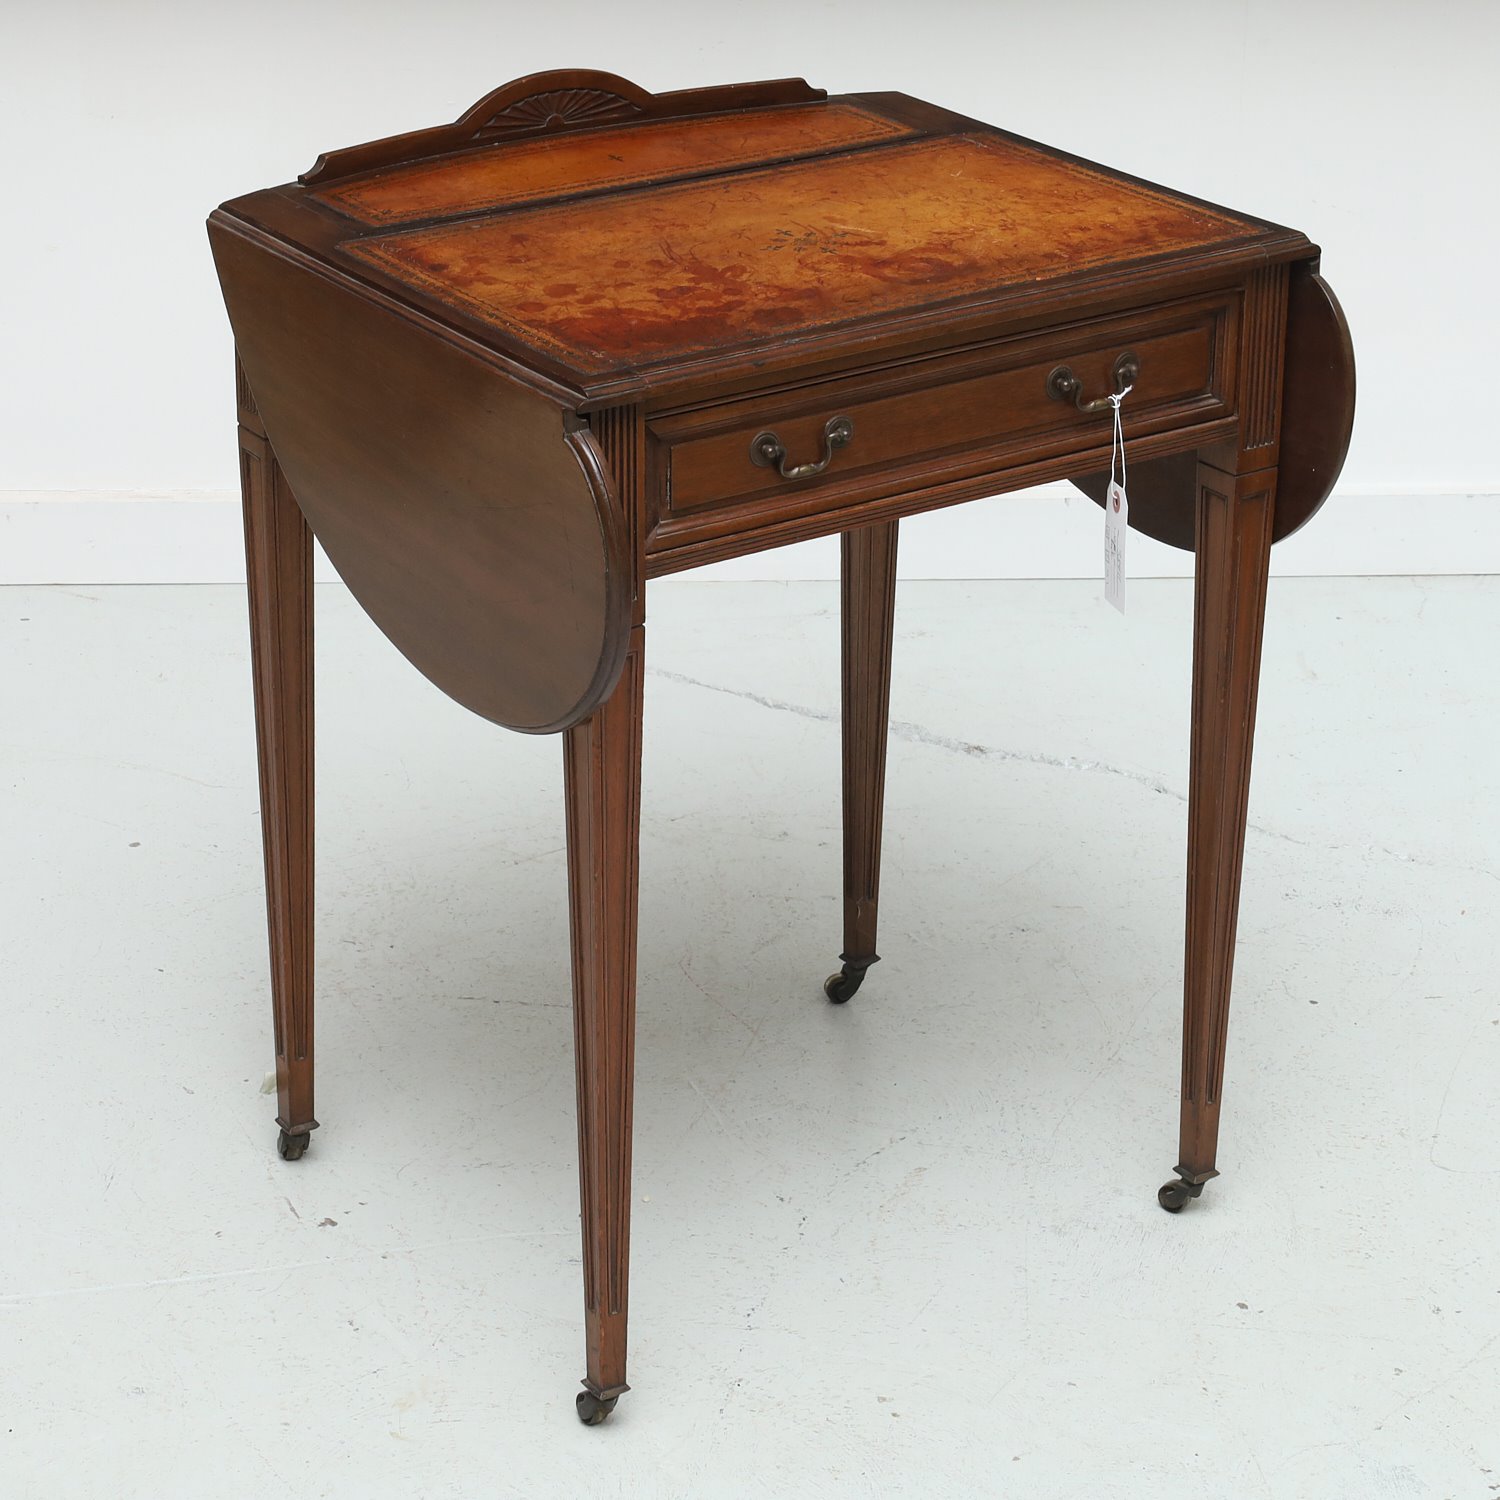 EDWARDIAN WRITING TABLE BY JAMES 361e8f